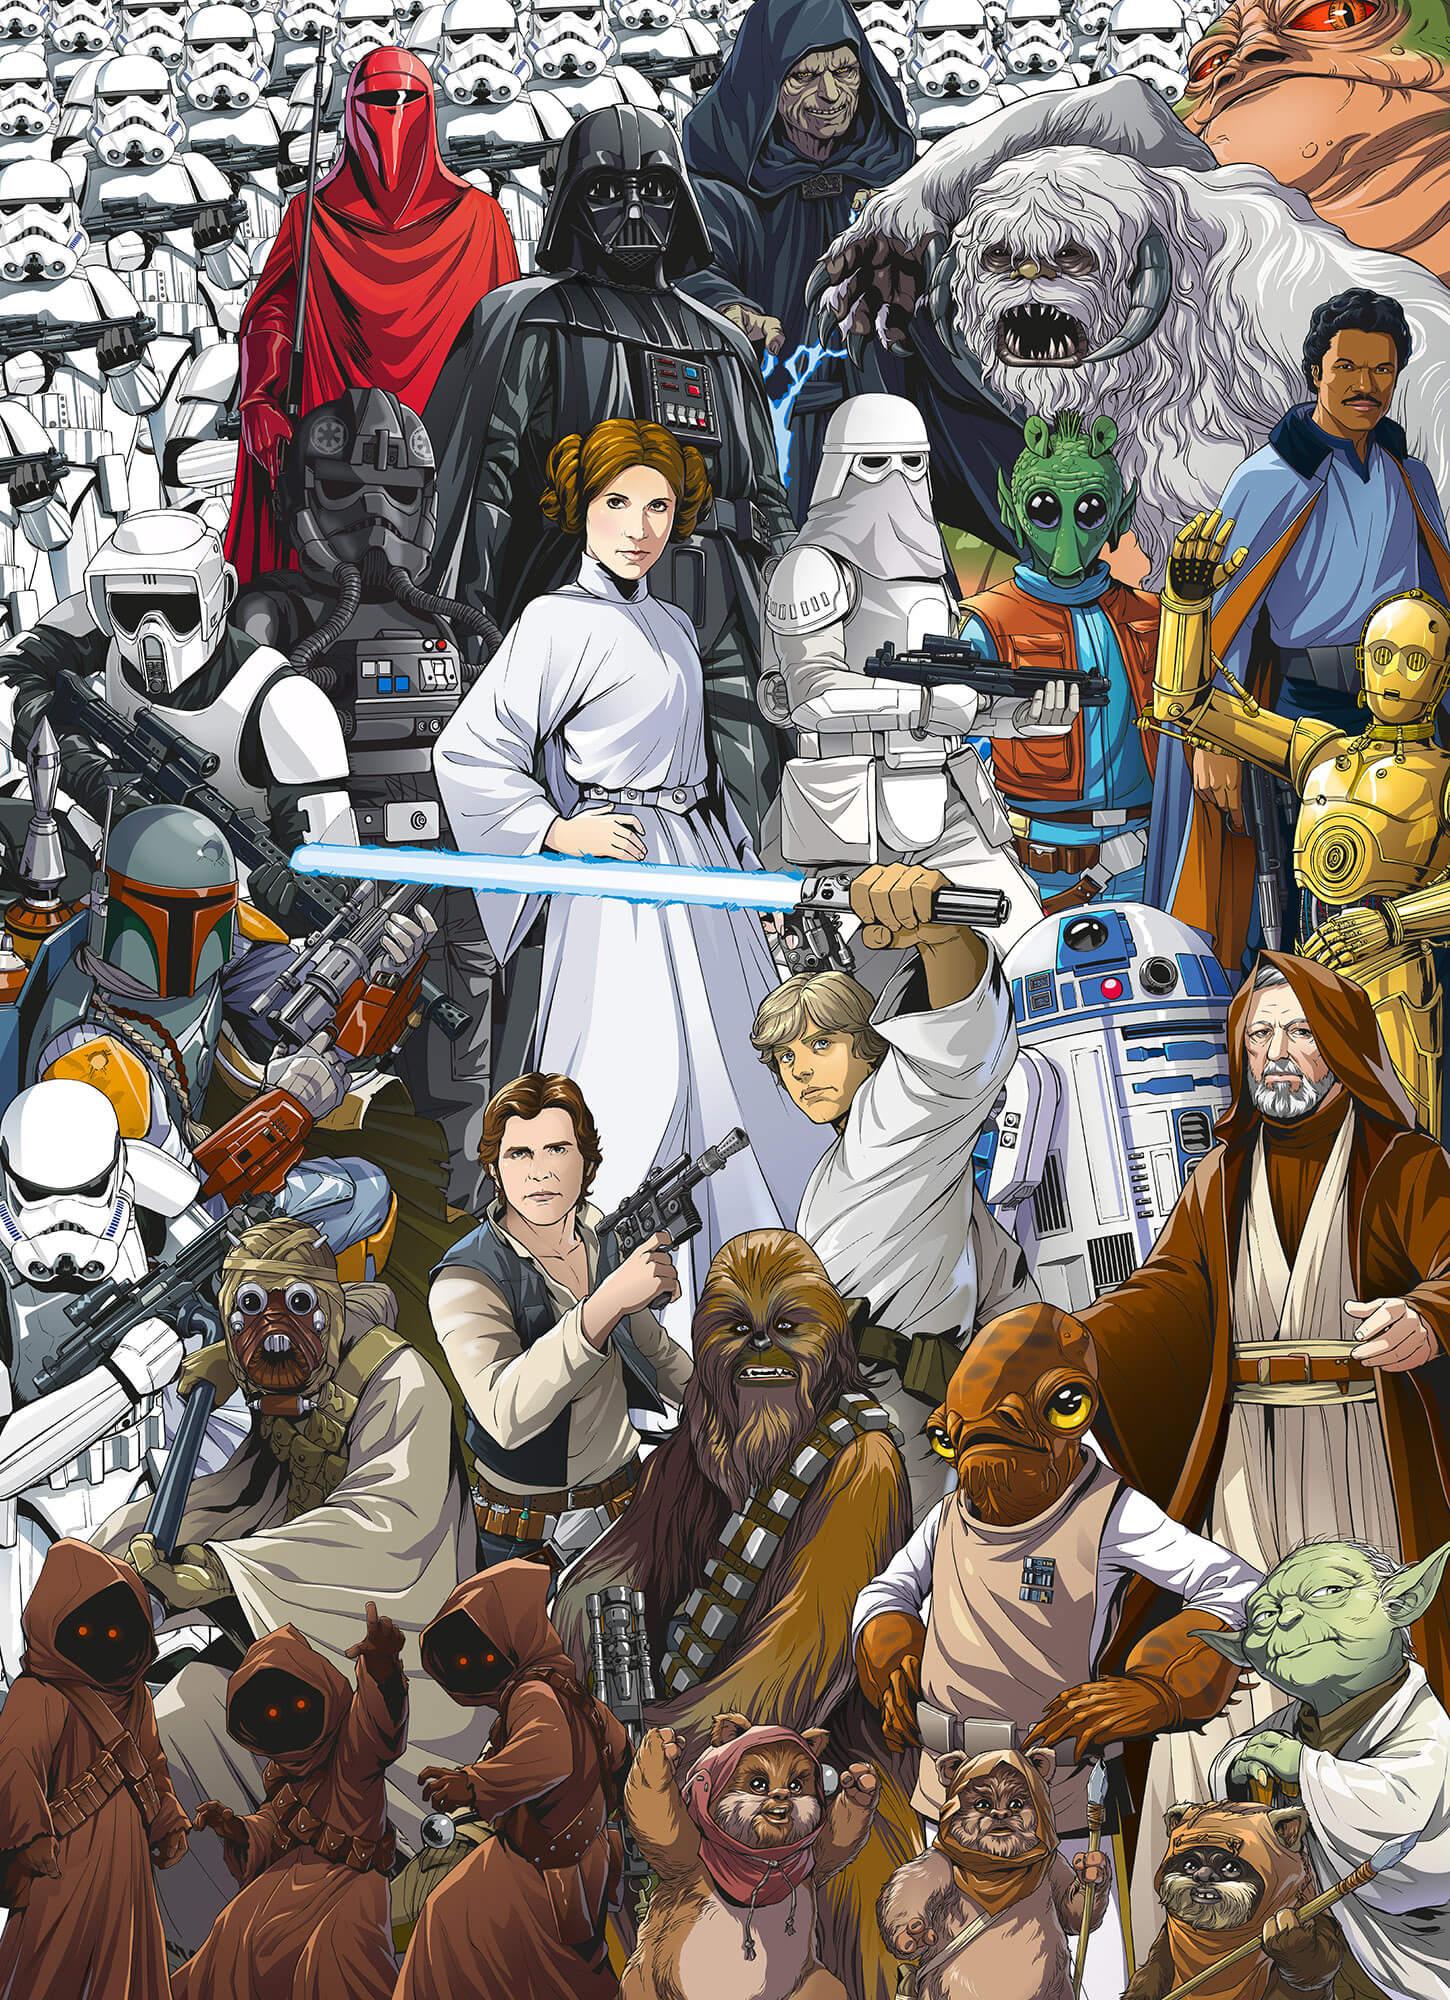 Wall mural wallpaper Star Wars retro collage 254x184cm Man's cave feature wall 4036834241117